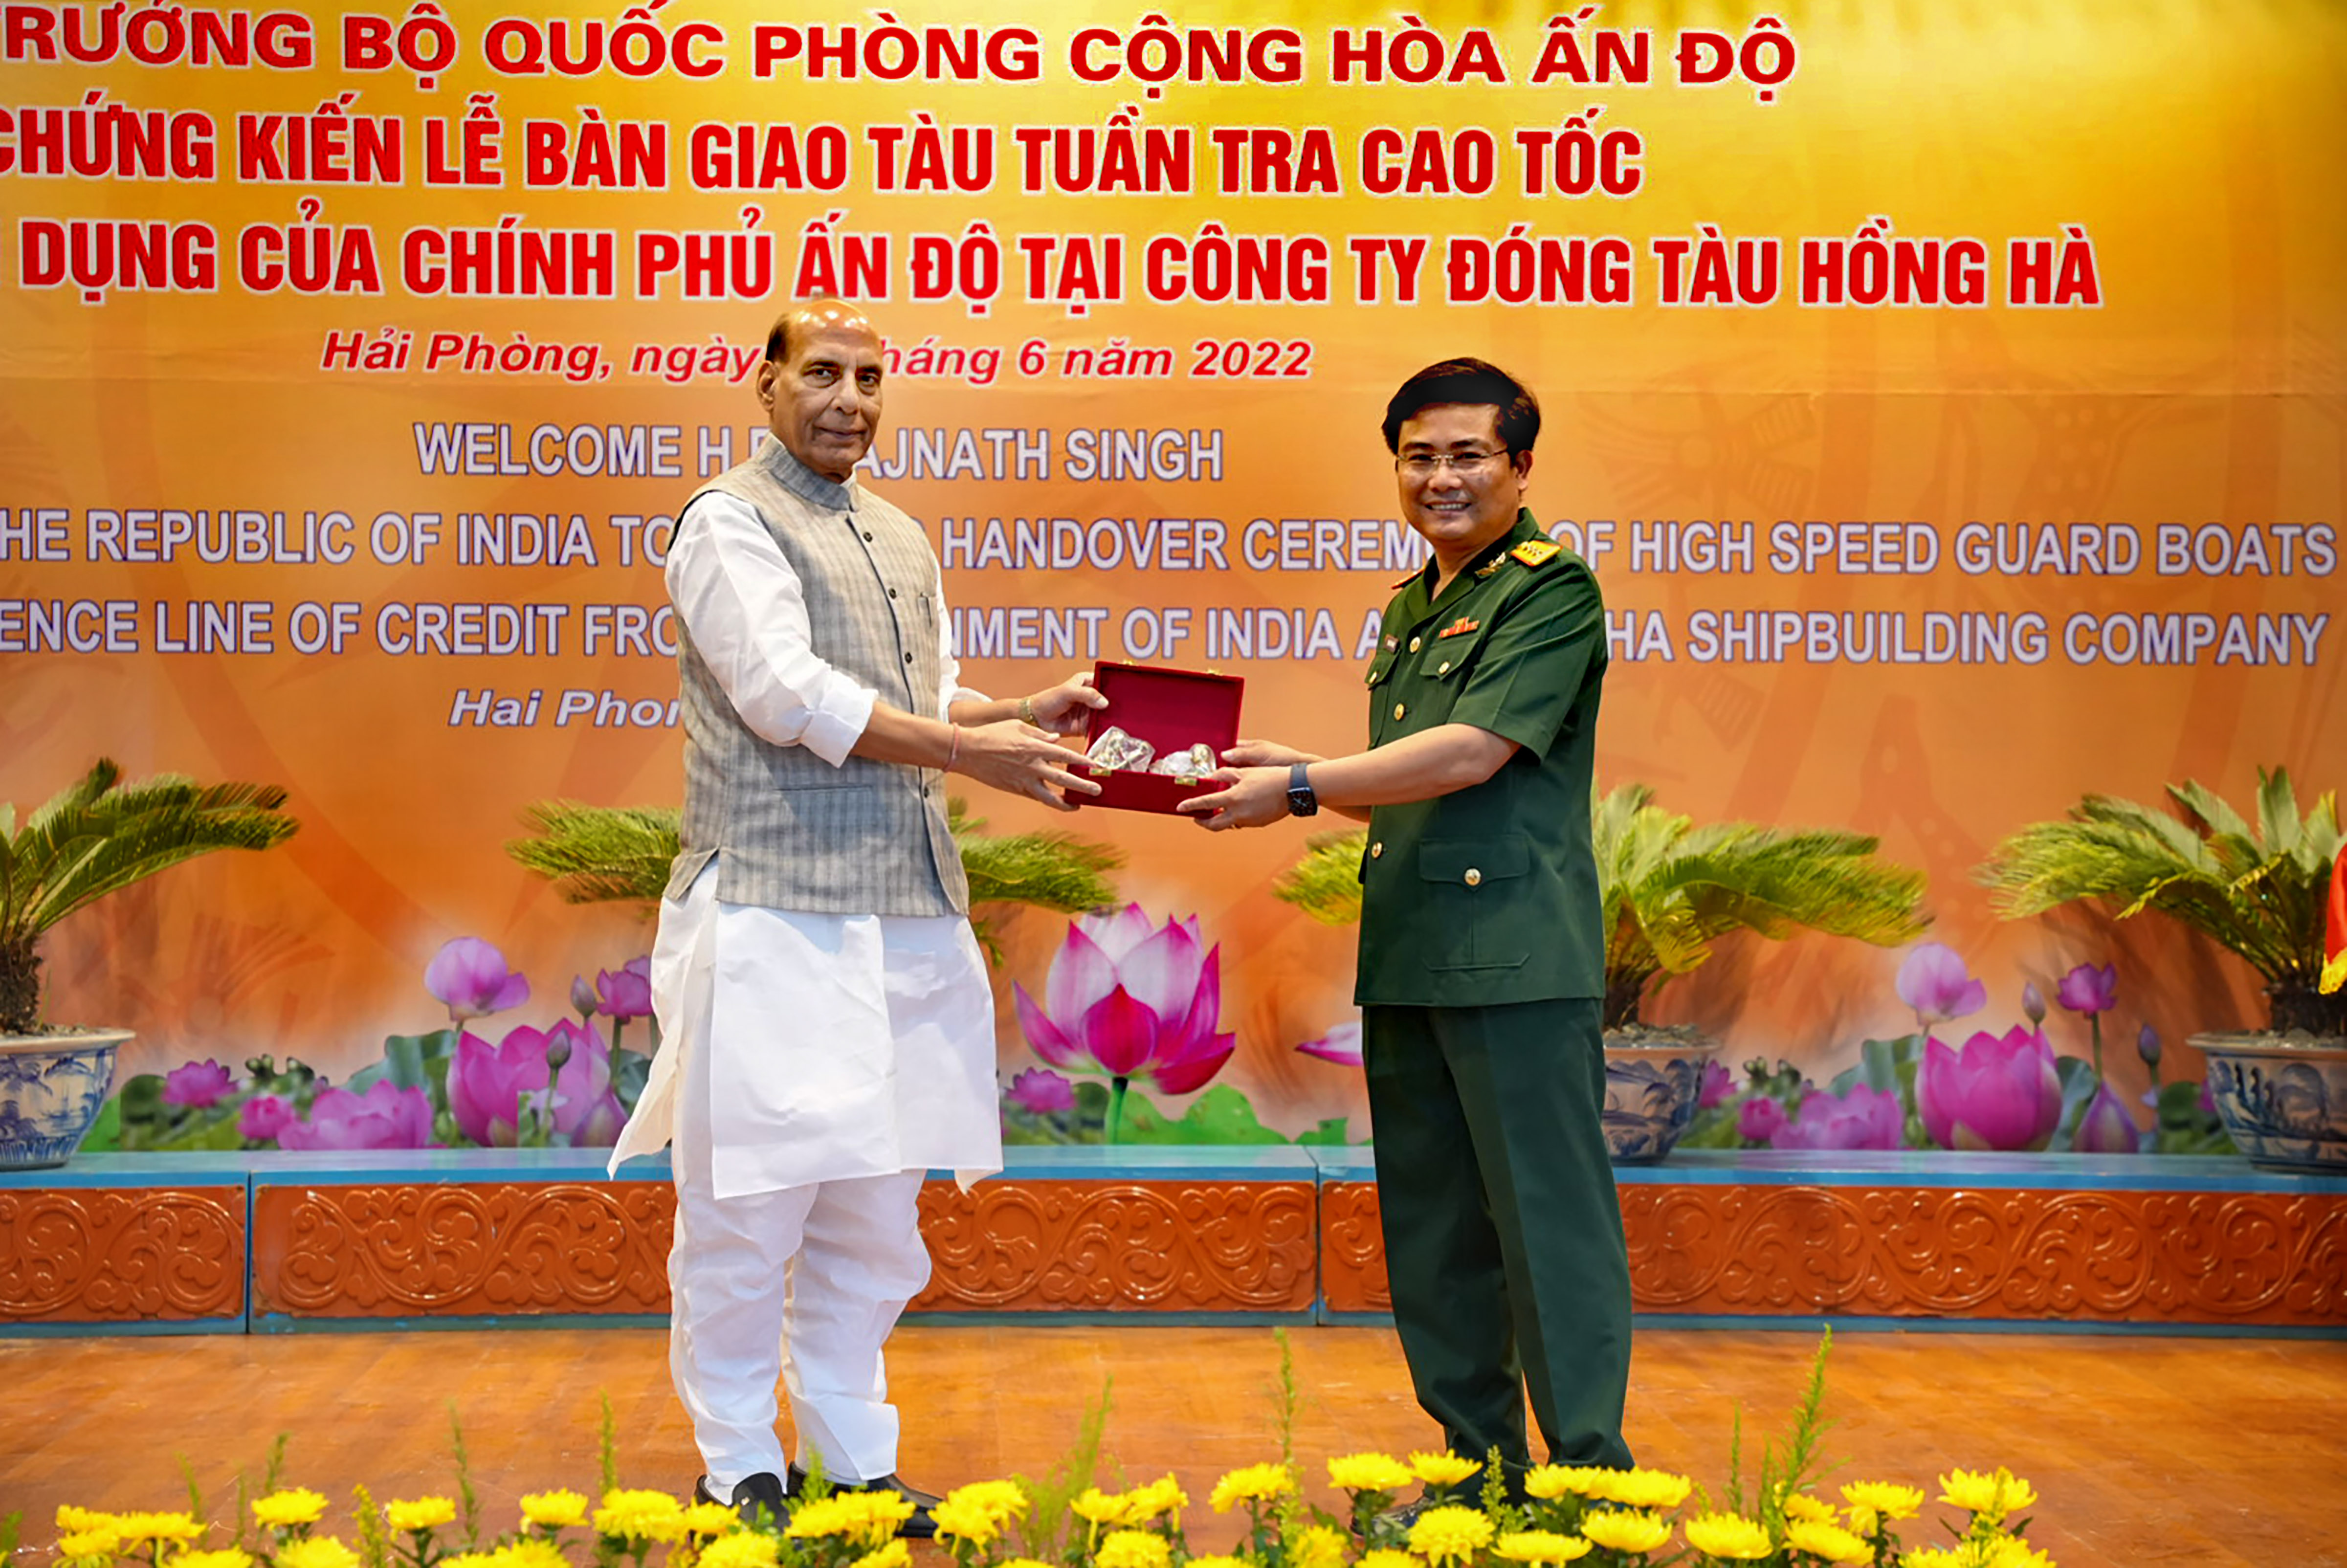 India hands over 12 high-speed guard boats to Vietnam